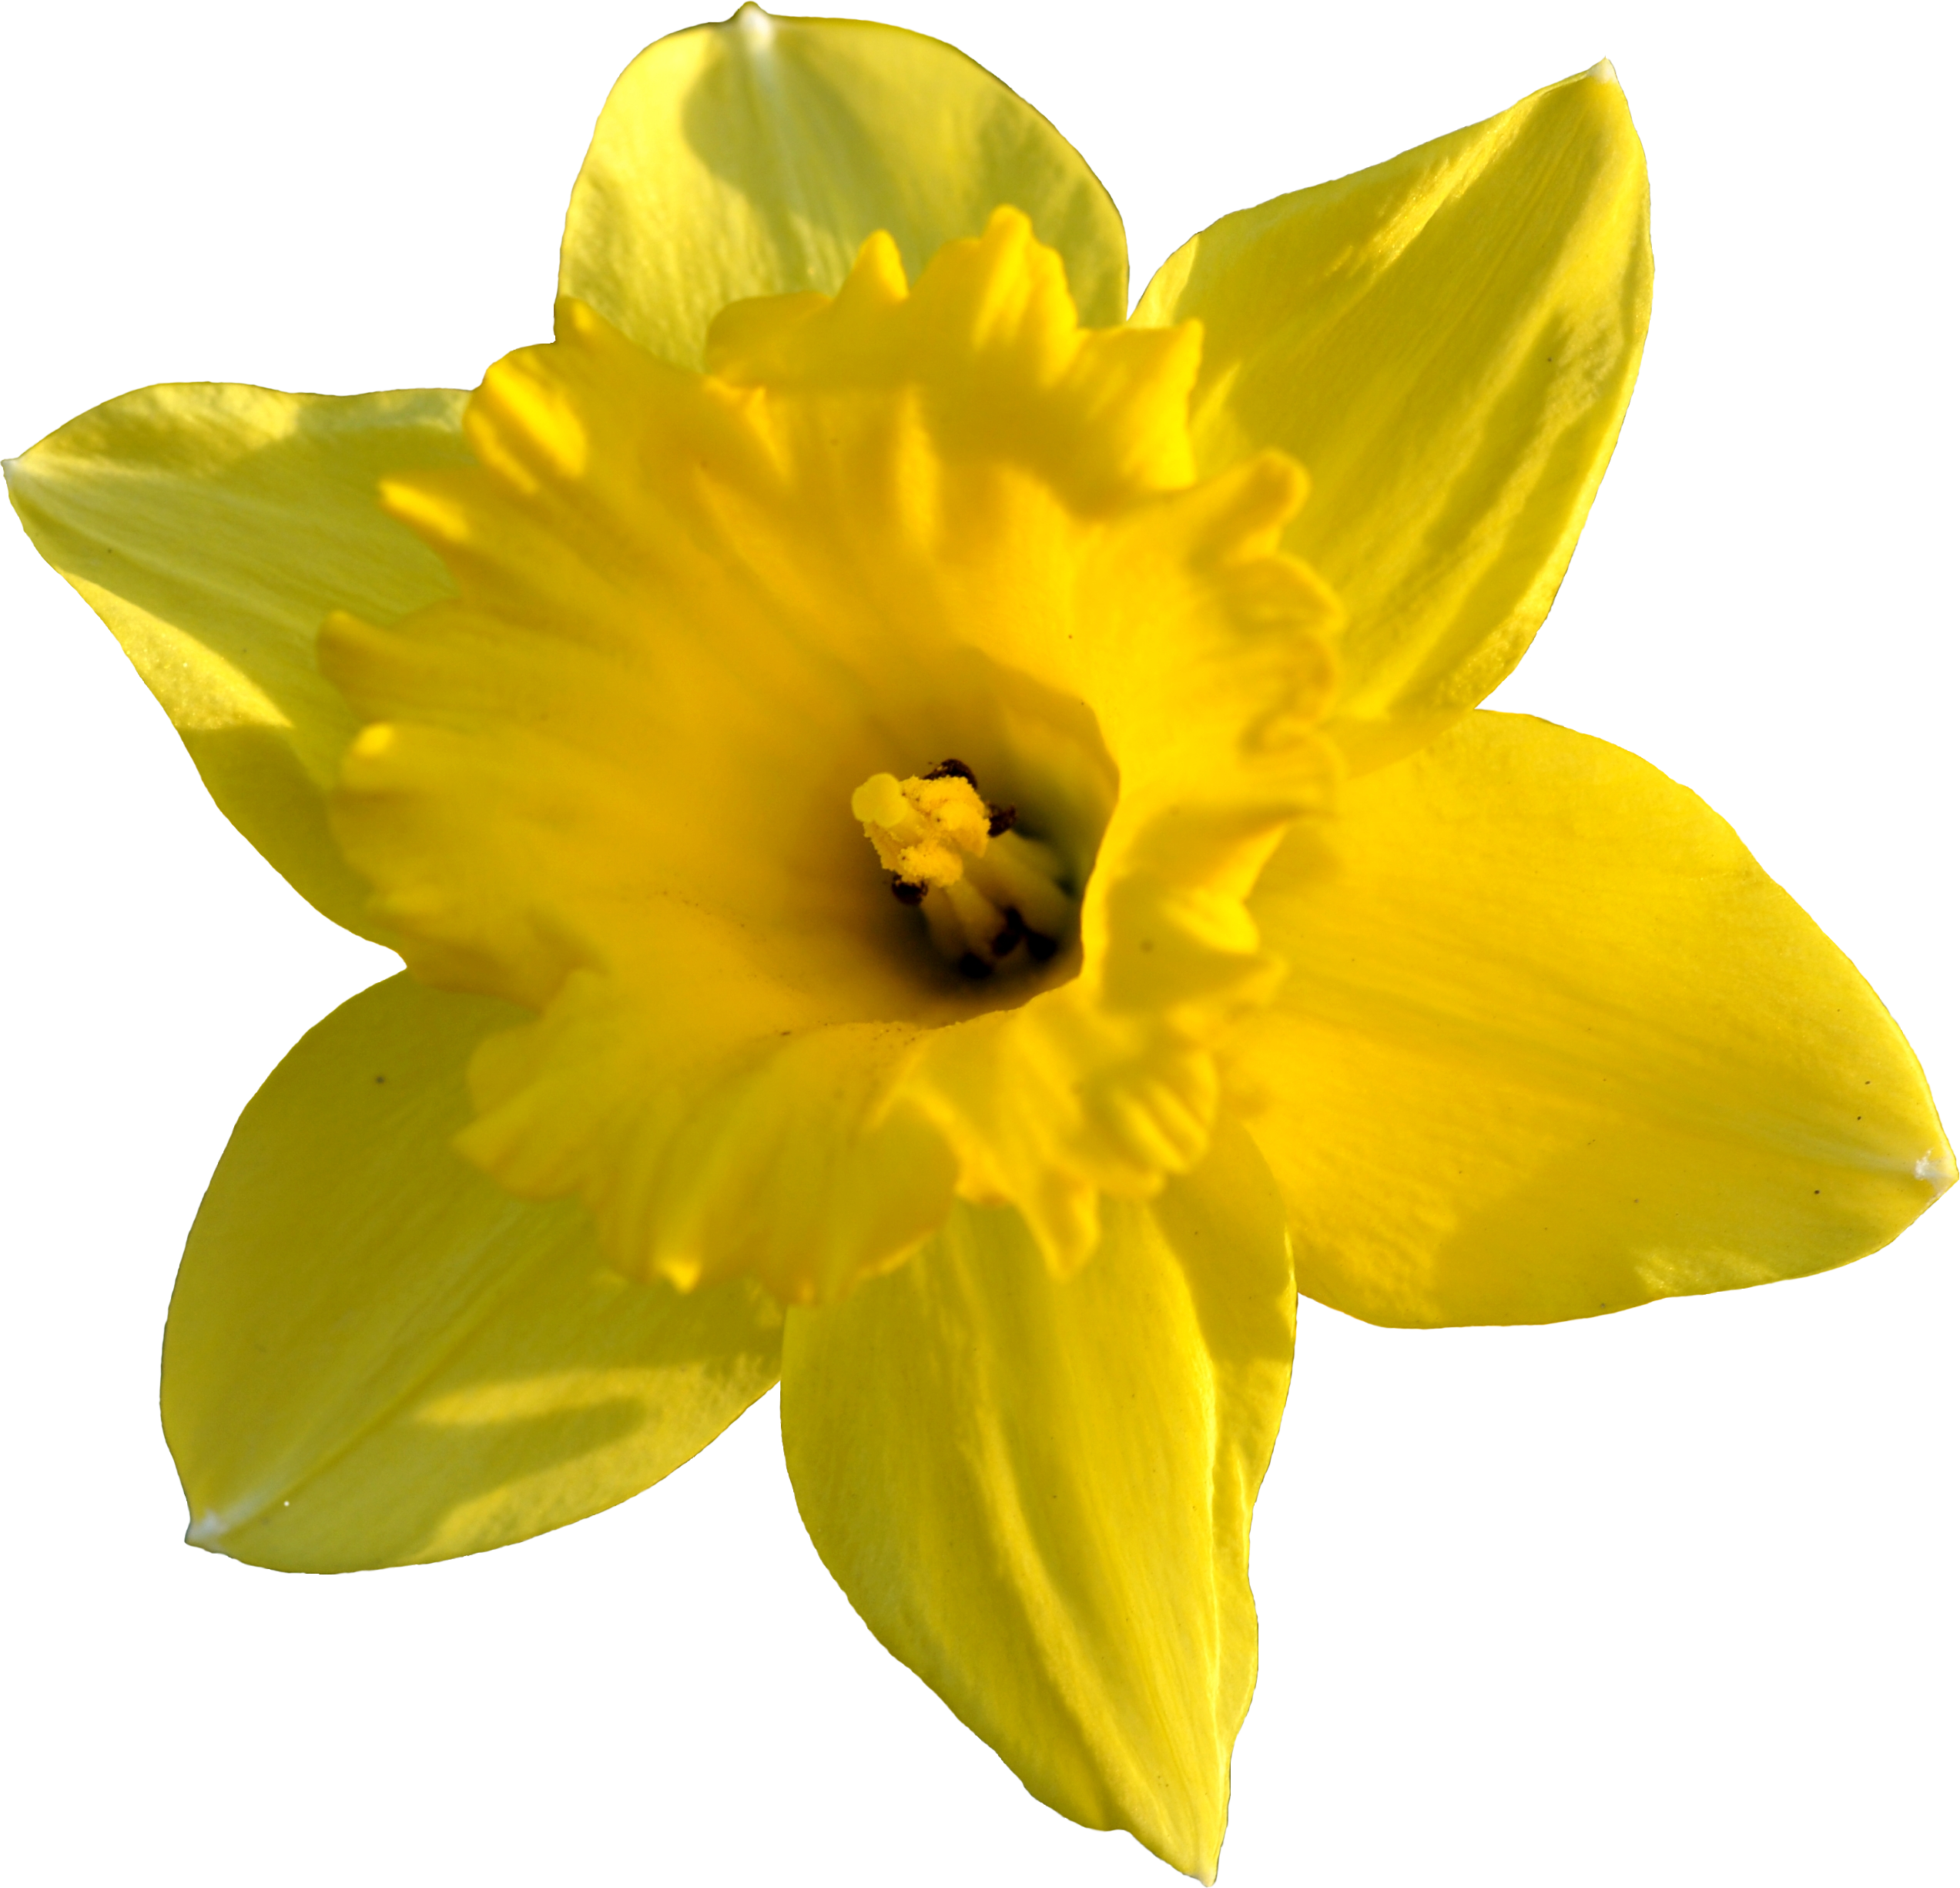 Daffodil Images & Pictures - Becuo